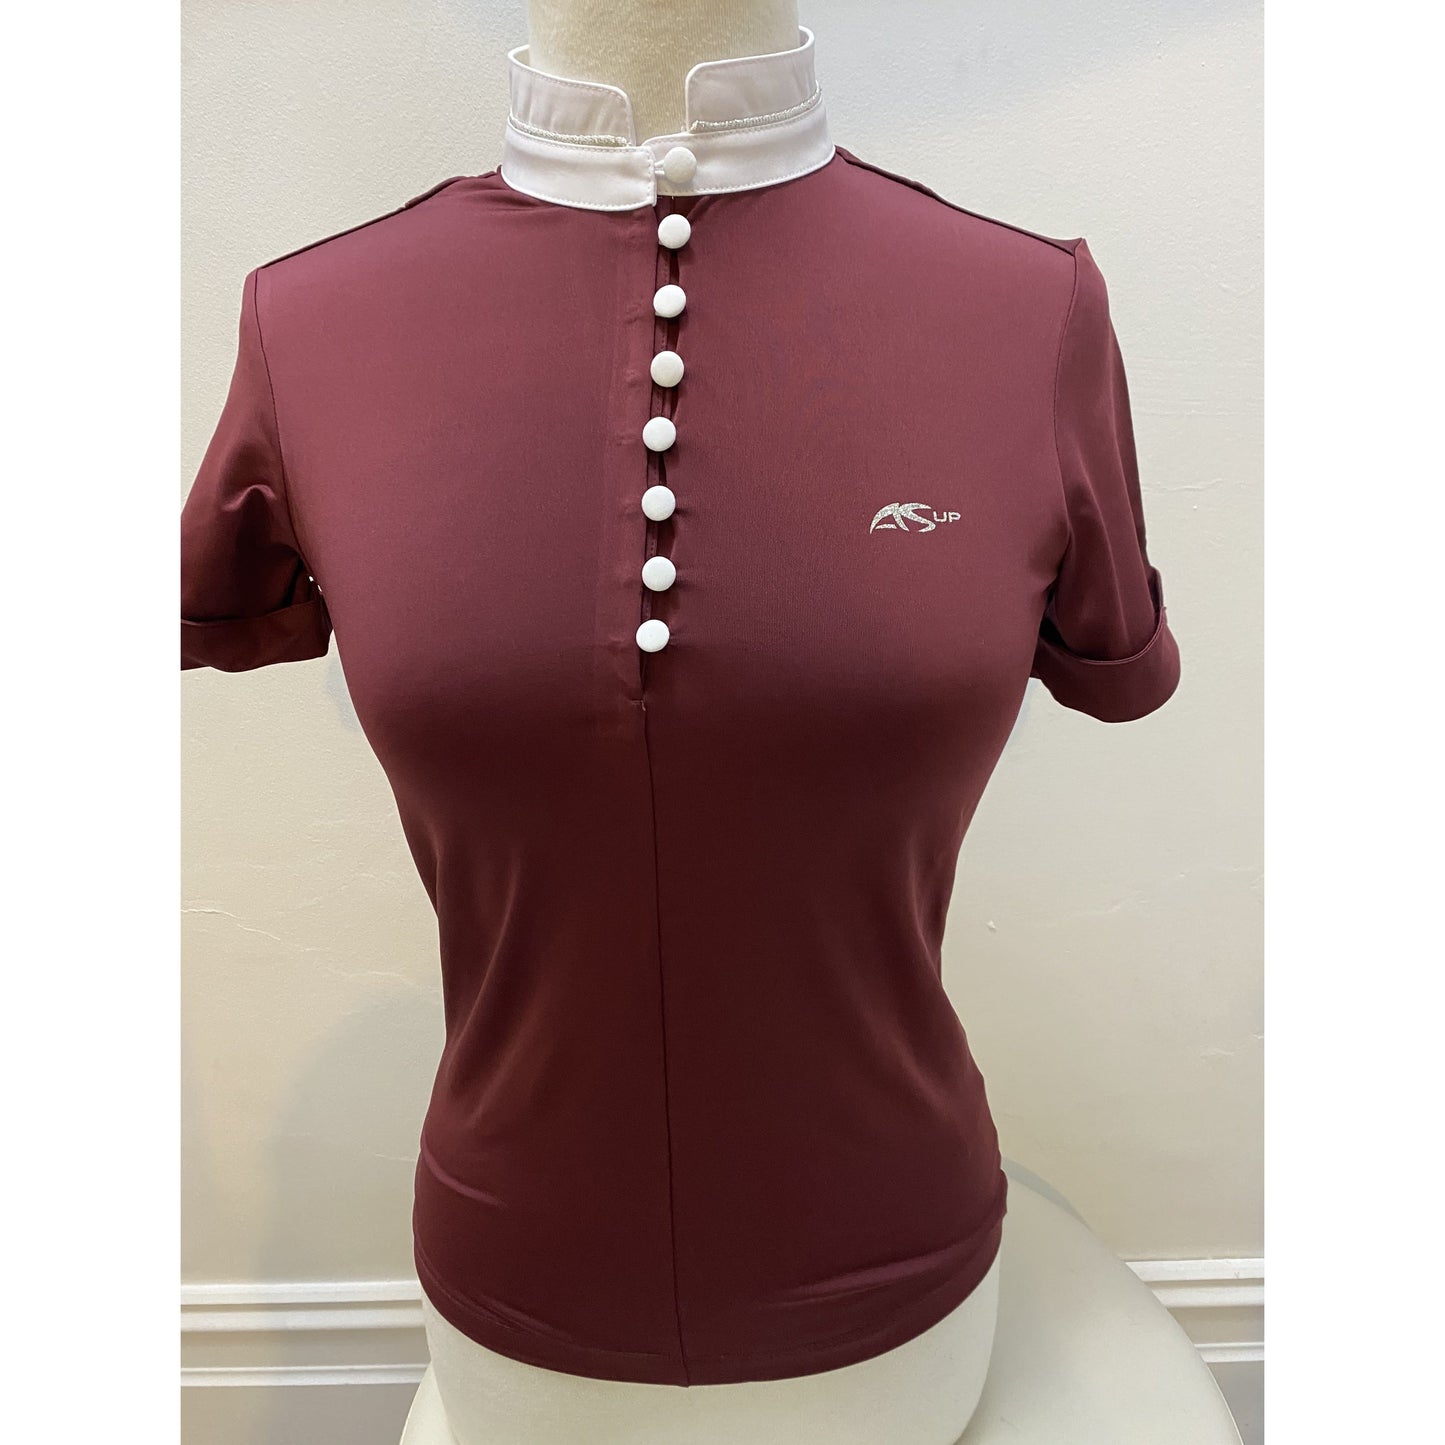 Anna Scarpati burgundy polo shirt with white buttons on mannequin.